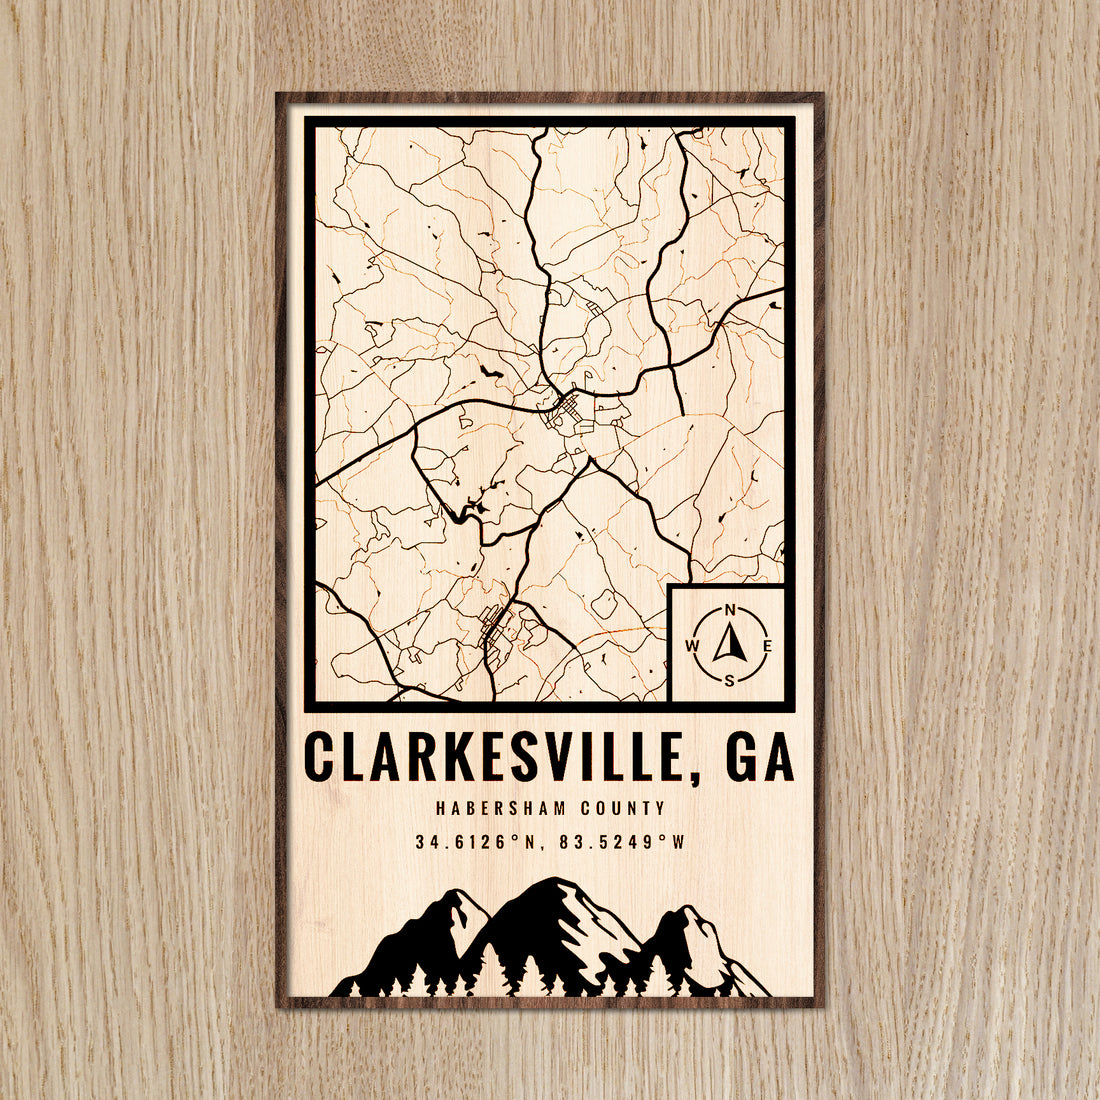 Custom wood map of Clarkseville, GA from G. Loebick Woodworks